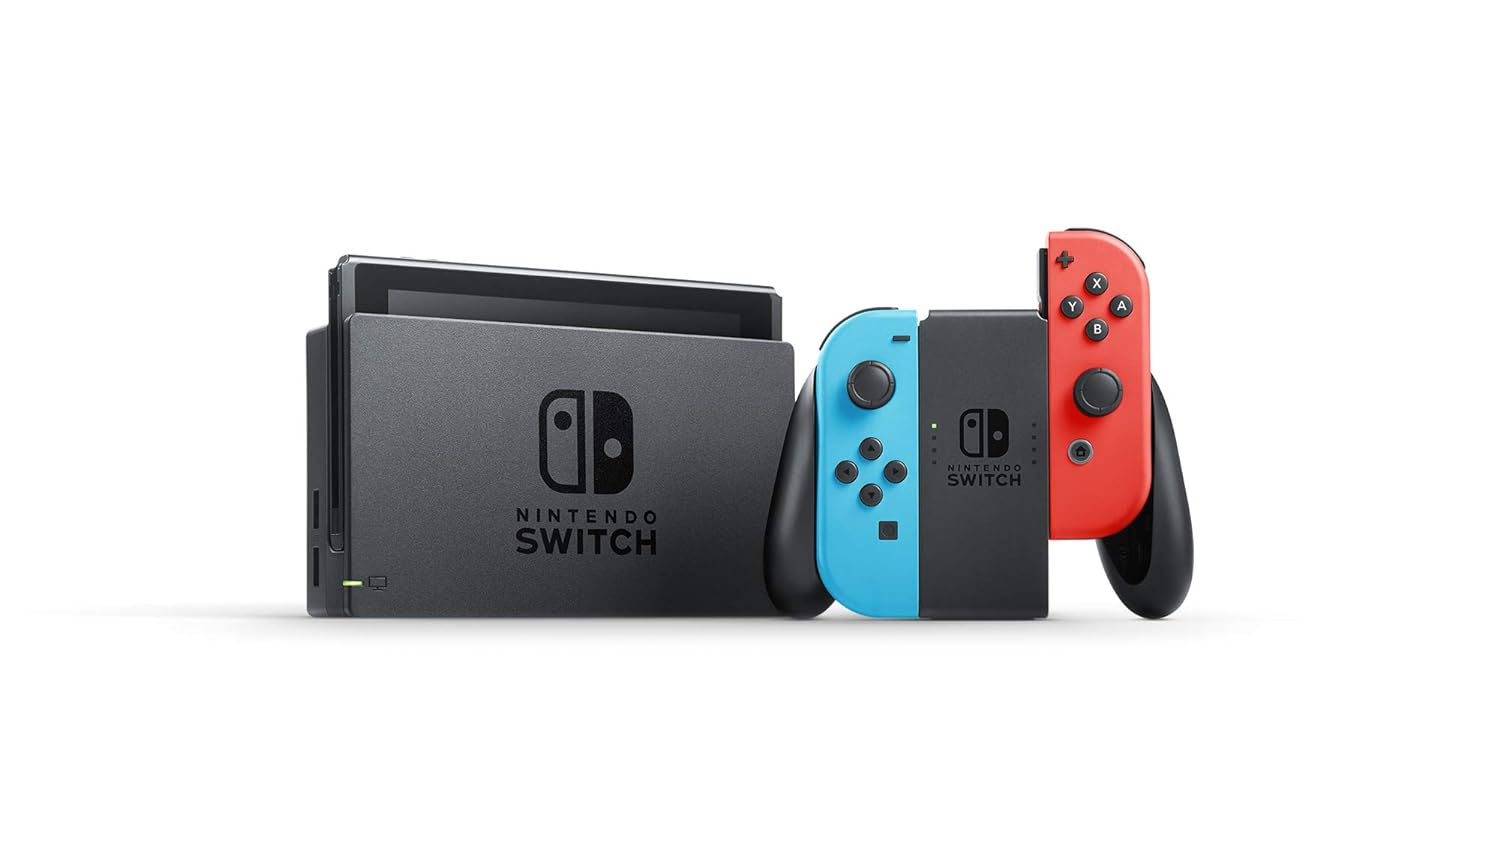 Nintendo Switch w/Neon Blue  Neon Red Joy-Con + Mario Kart 8 Deluxe (Full Game Download) + 3 Month Switch Online Individual Membership